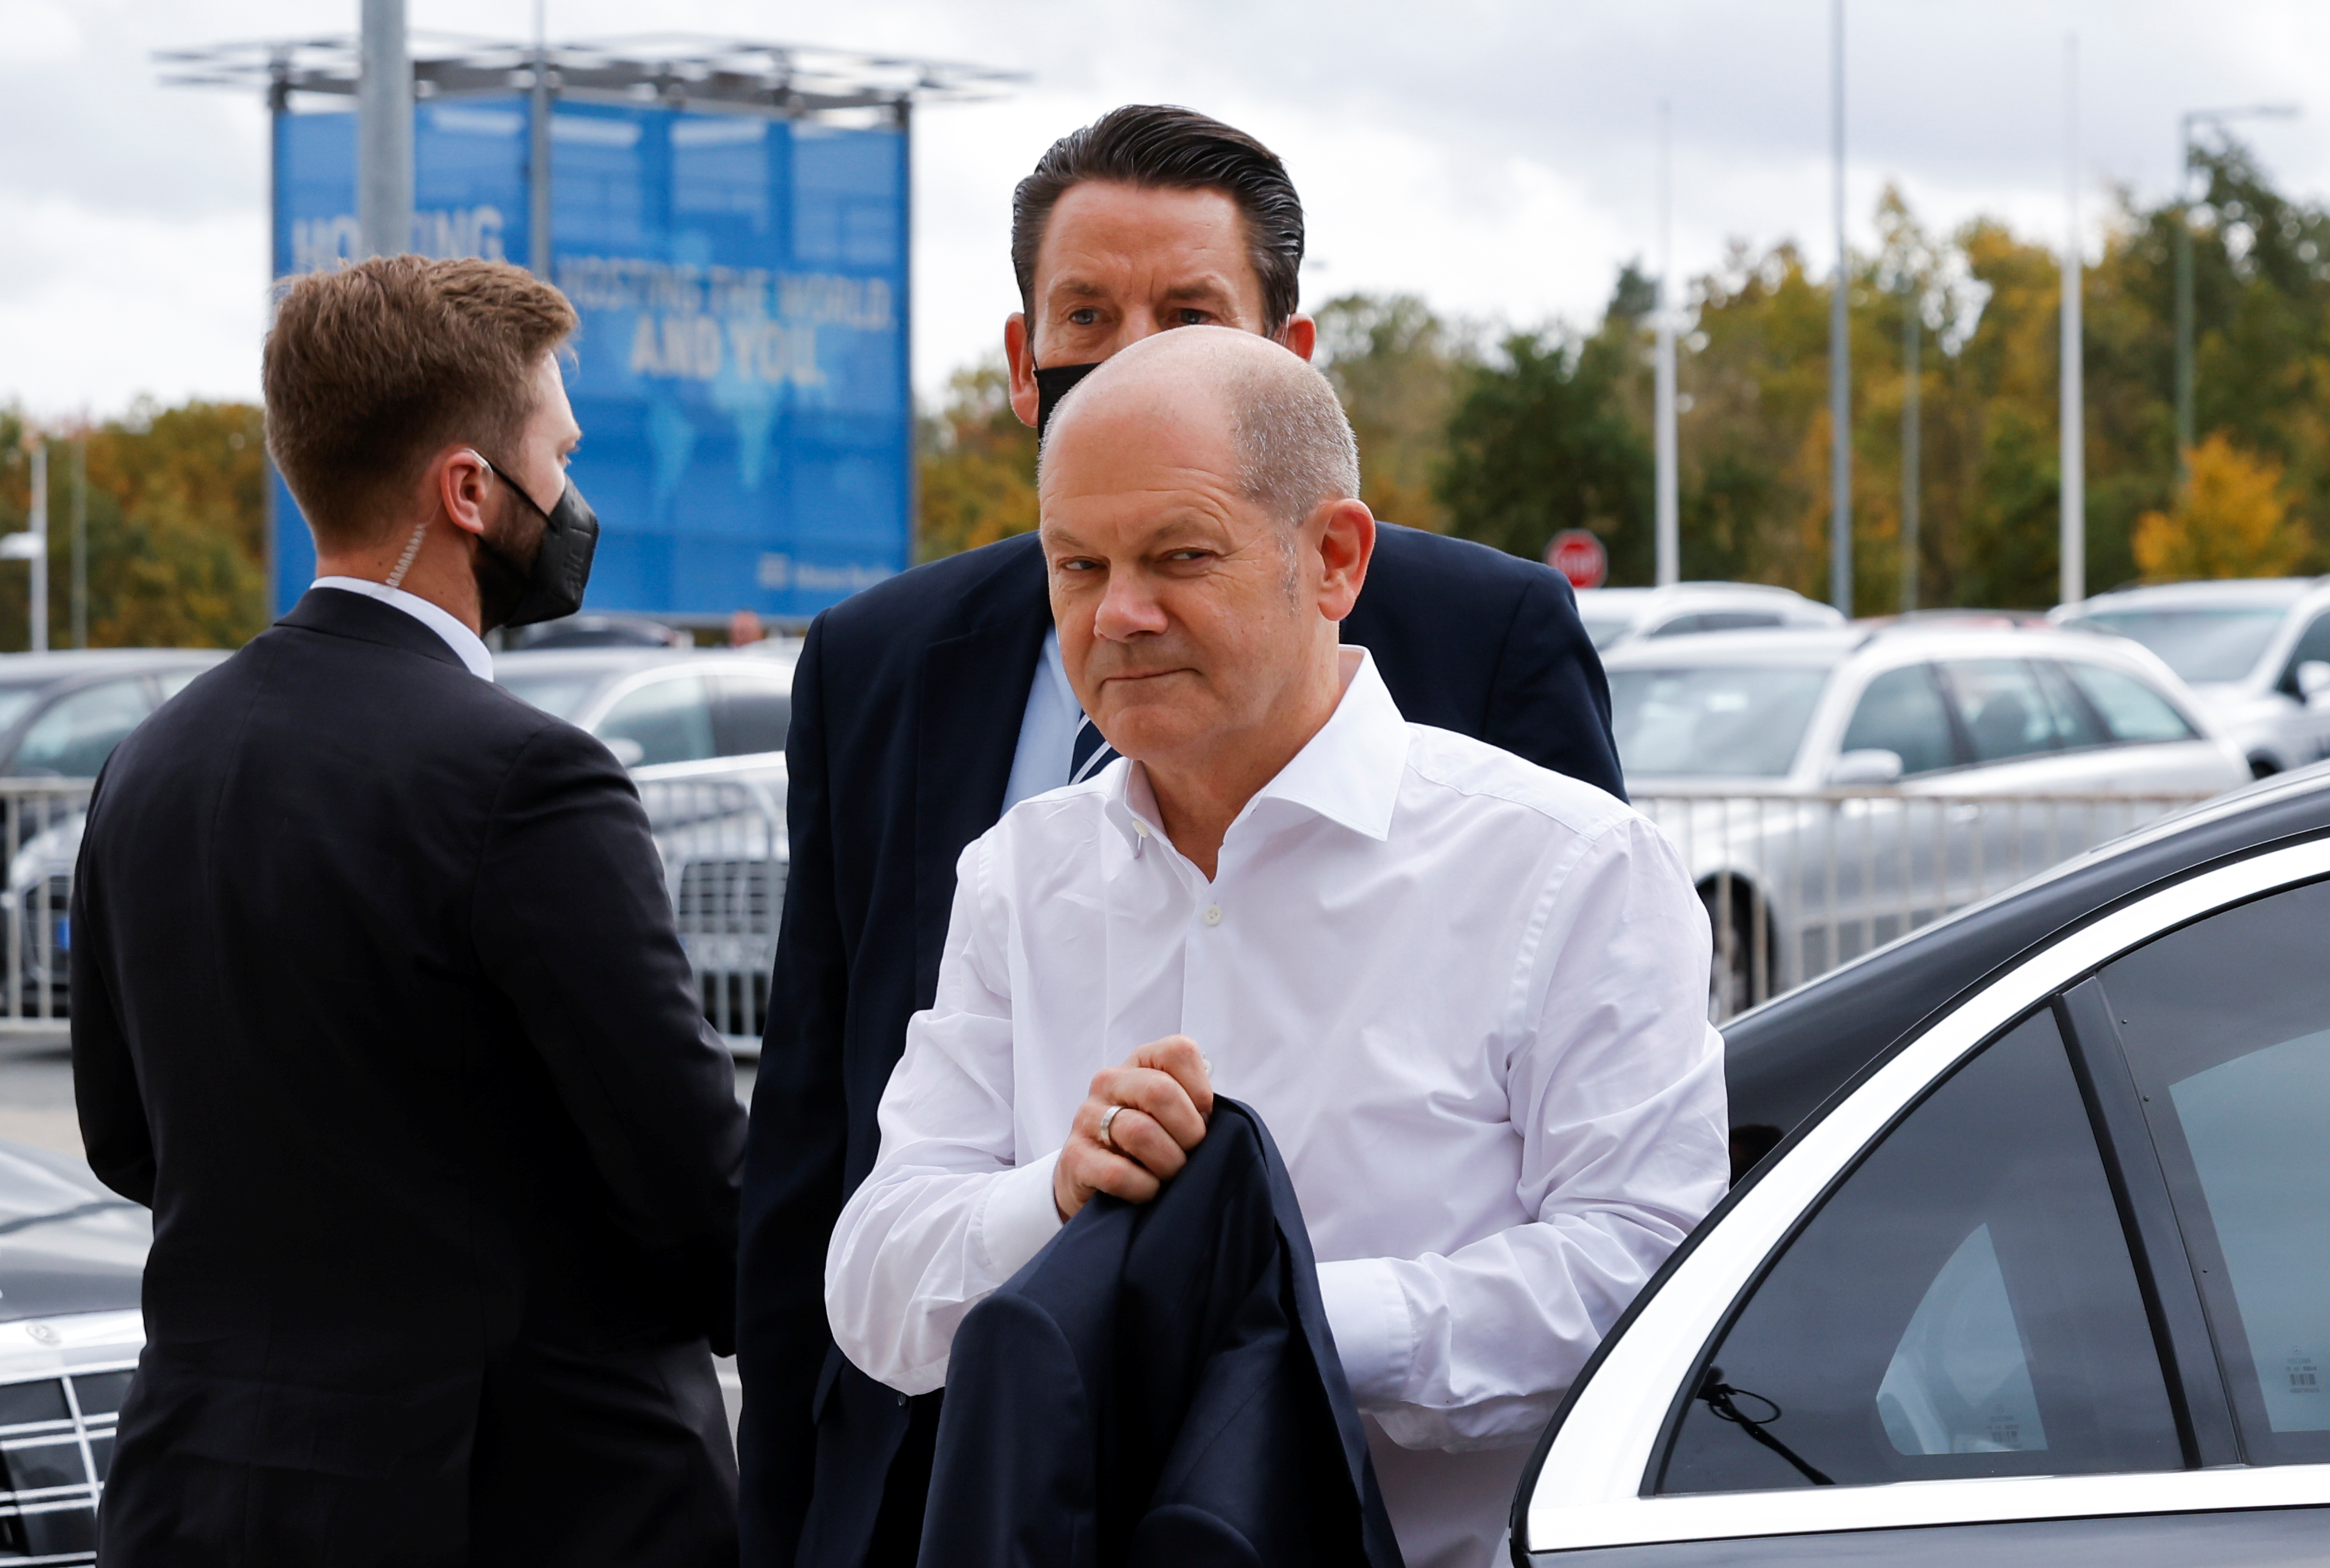 Social Democratic Party (SPD) top candidate for chancellor Olaf Scholz arrives for talks to form a so-called traffic light government coalition, in Berlin, Germany, October 21, 2021. REUTERS/Michele Tantussi